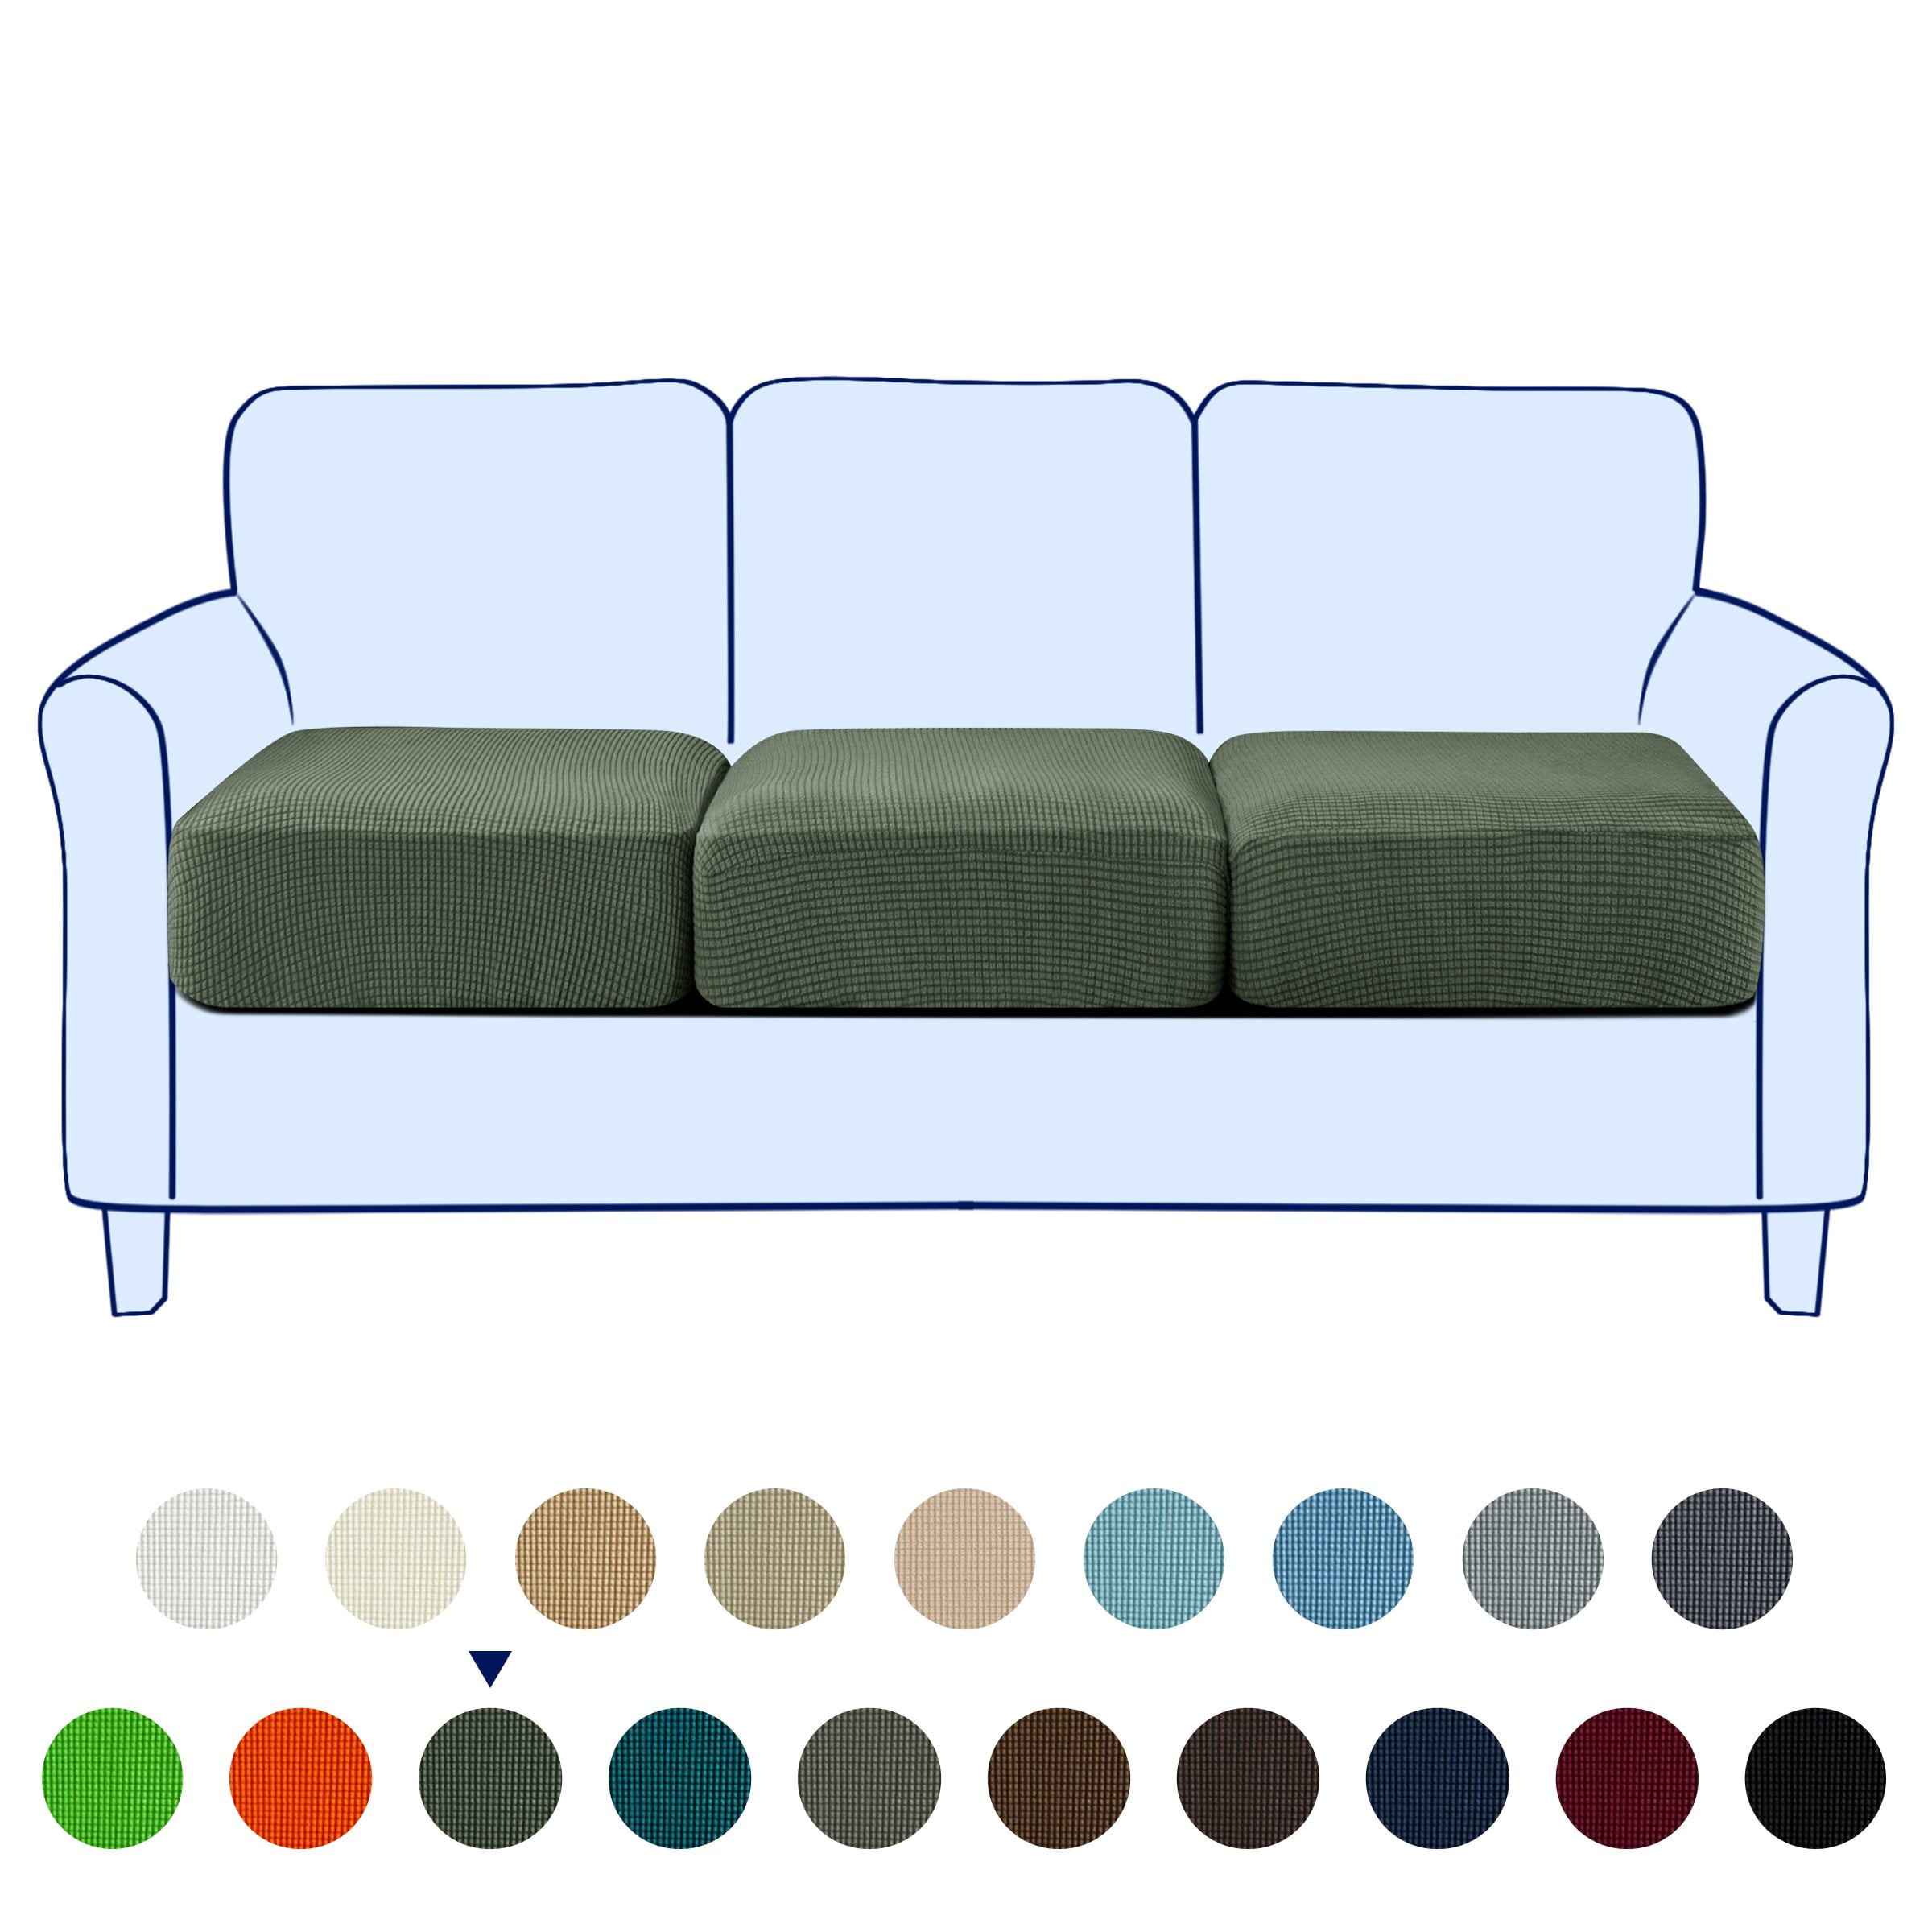 Details about   subrtex Stretch Cushion Cover Leather Couch Cushion  Assorted Sizes Colors 